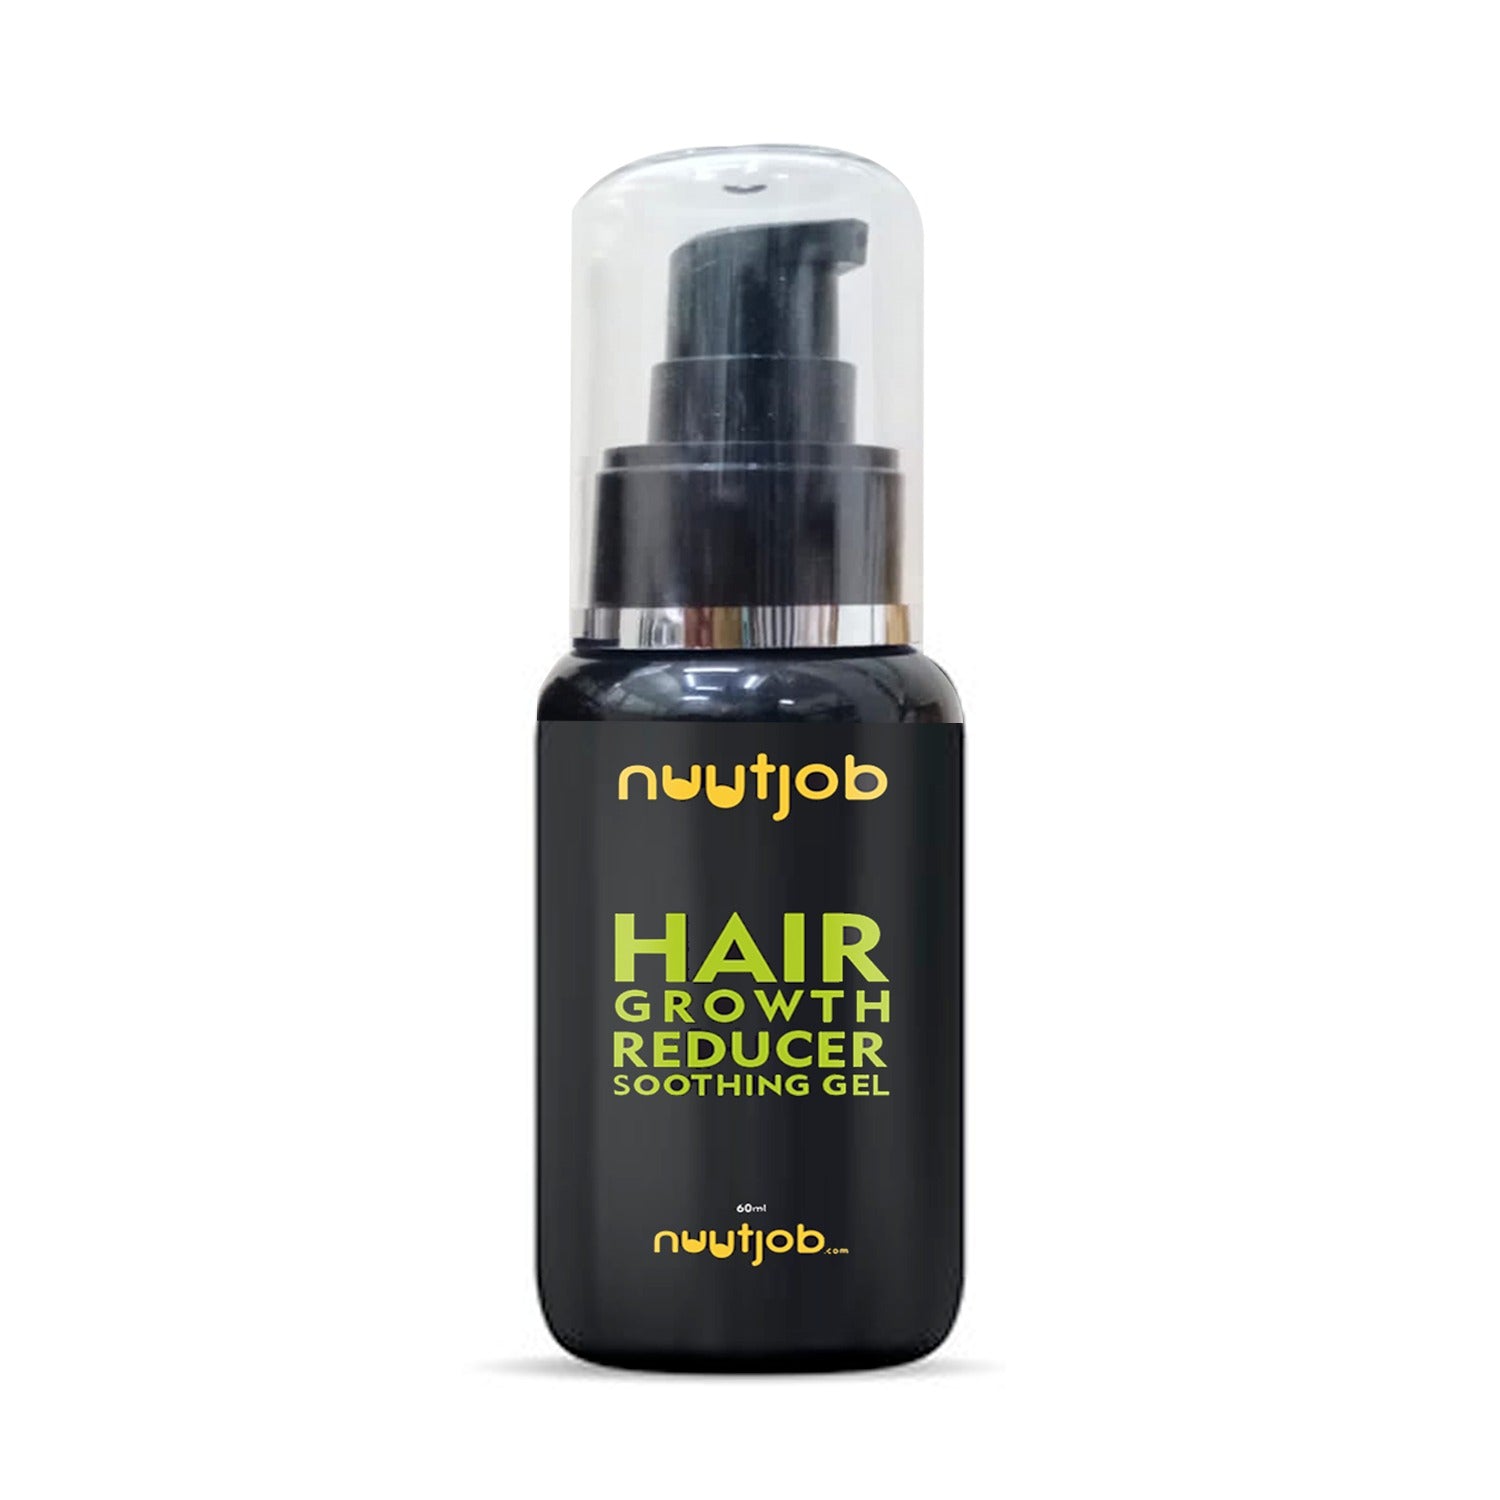 Hair Growth Reducer Soothing Gel - Effectively Reduces Hair Regrowth | 60 ML | Nuutjob